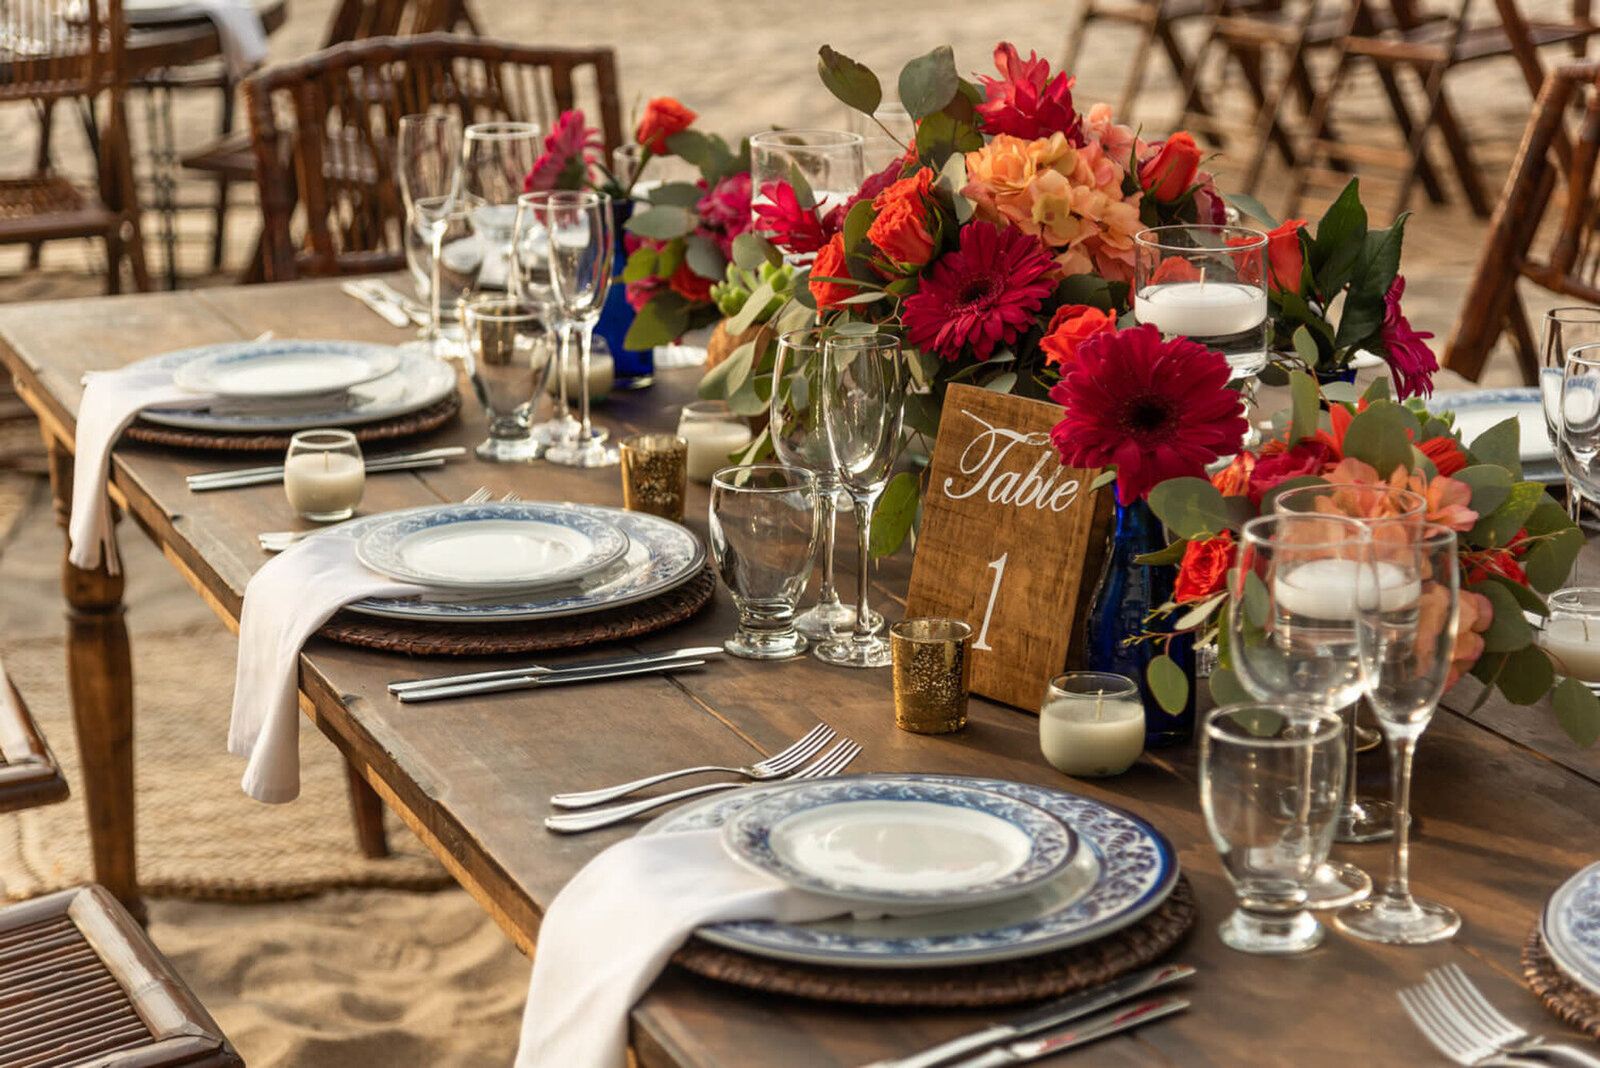 Luxurious wedding dining table with plates, glasses and colorful floral centerpiece by the beach